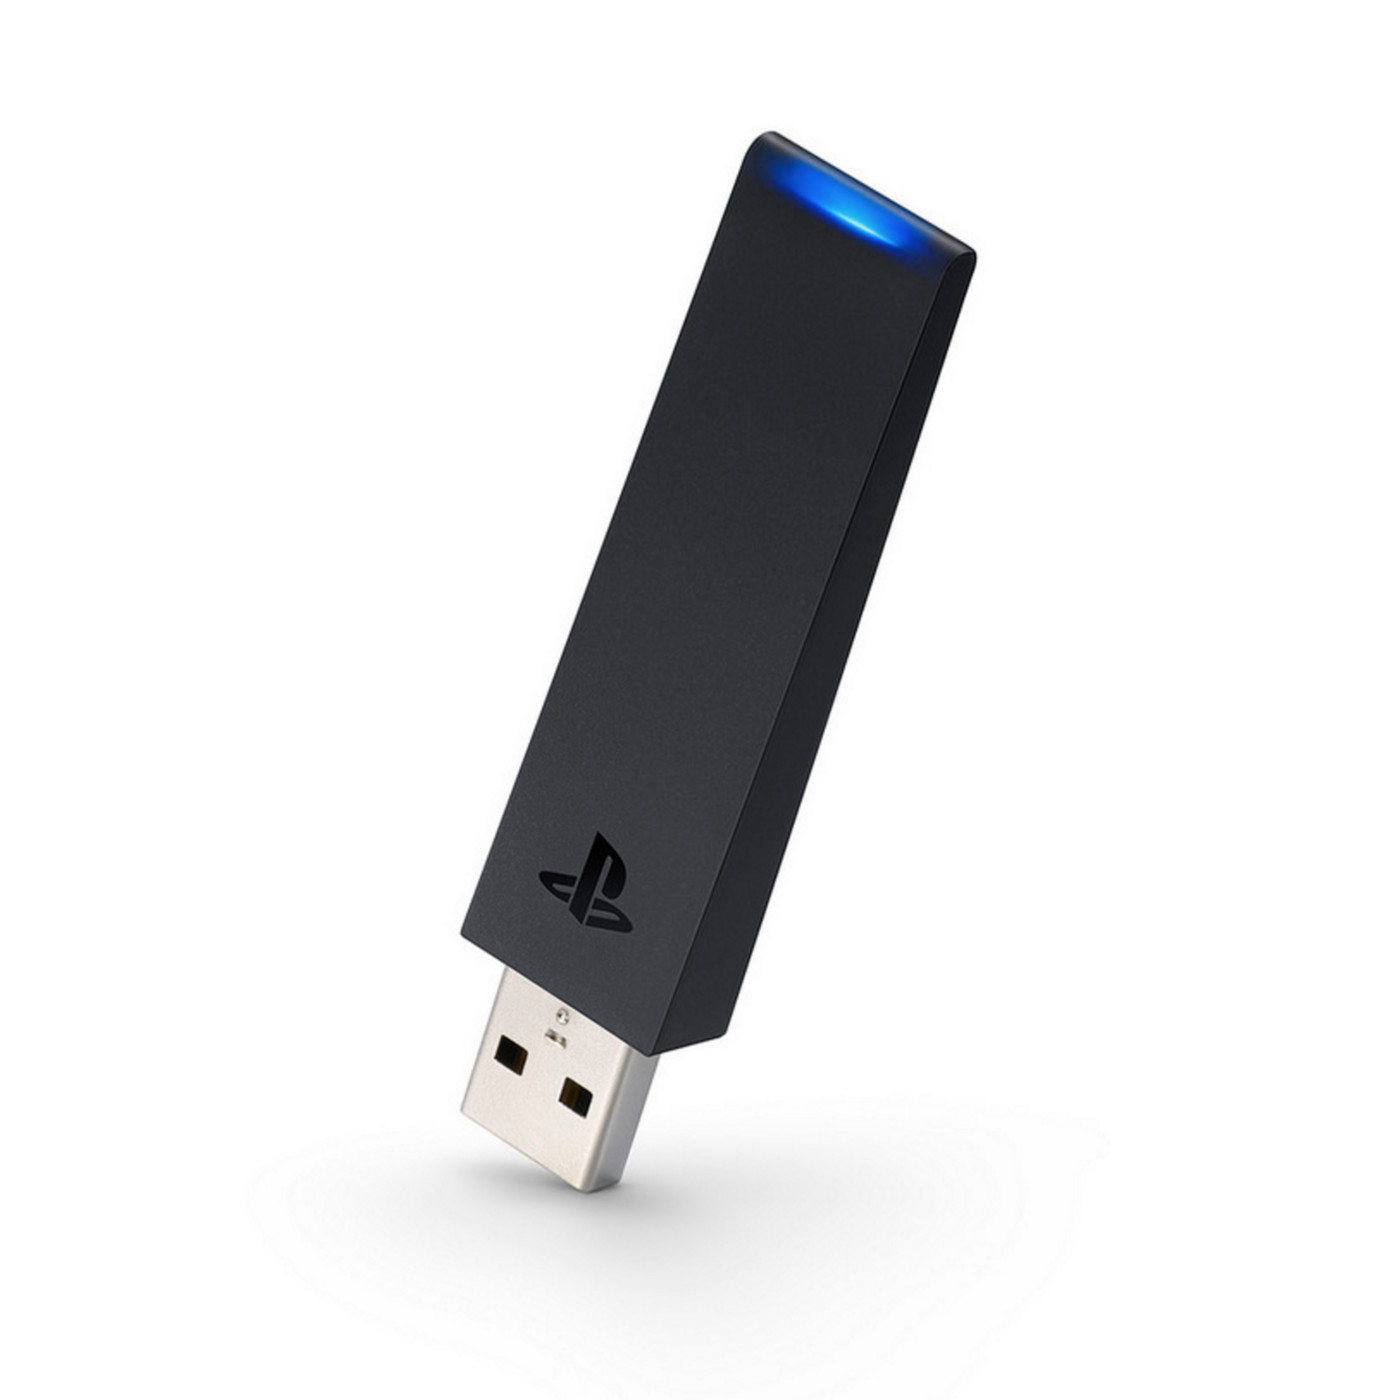 $25 USB dongle adds full DualShock 4 support PC and Mac - The Verge